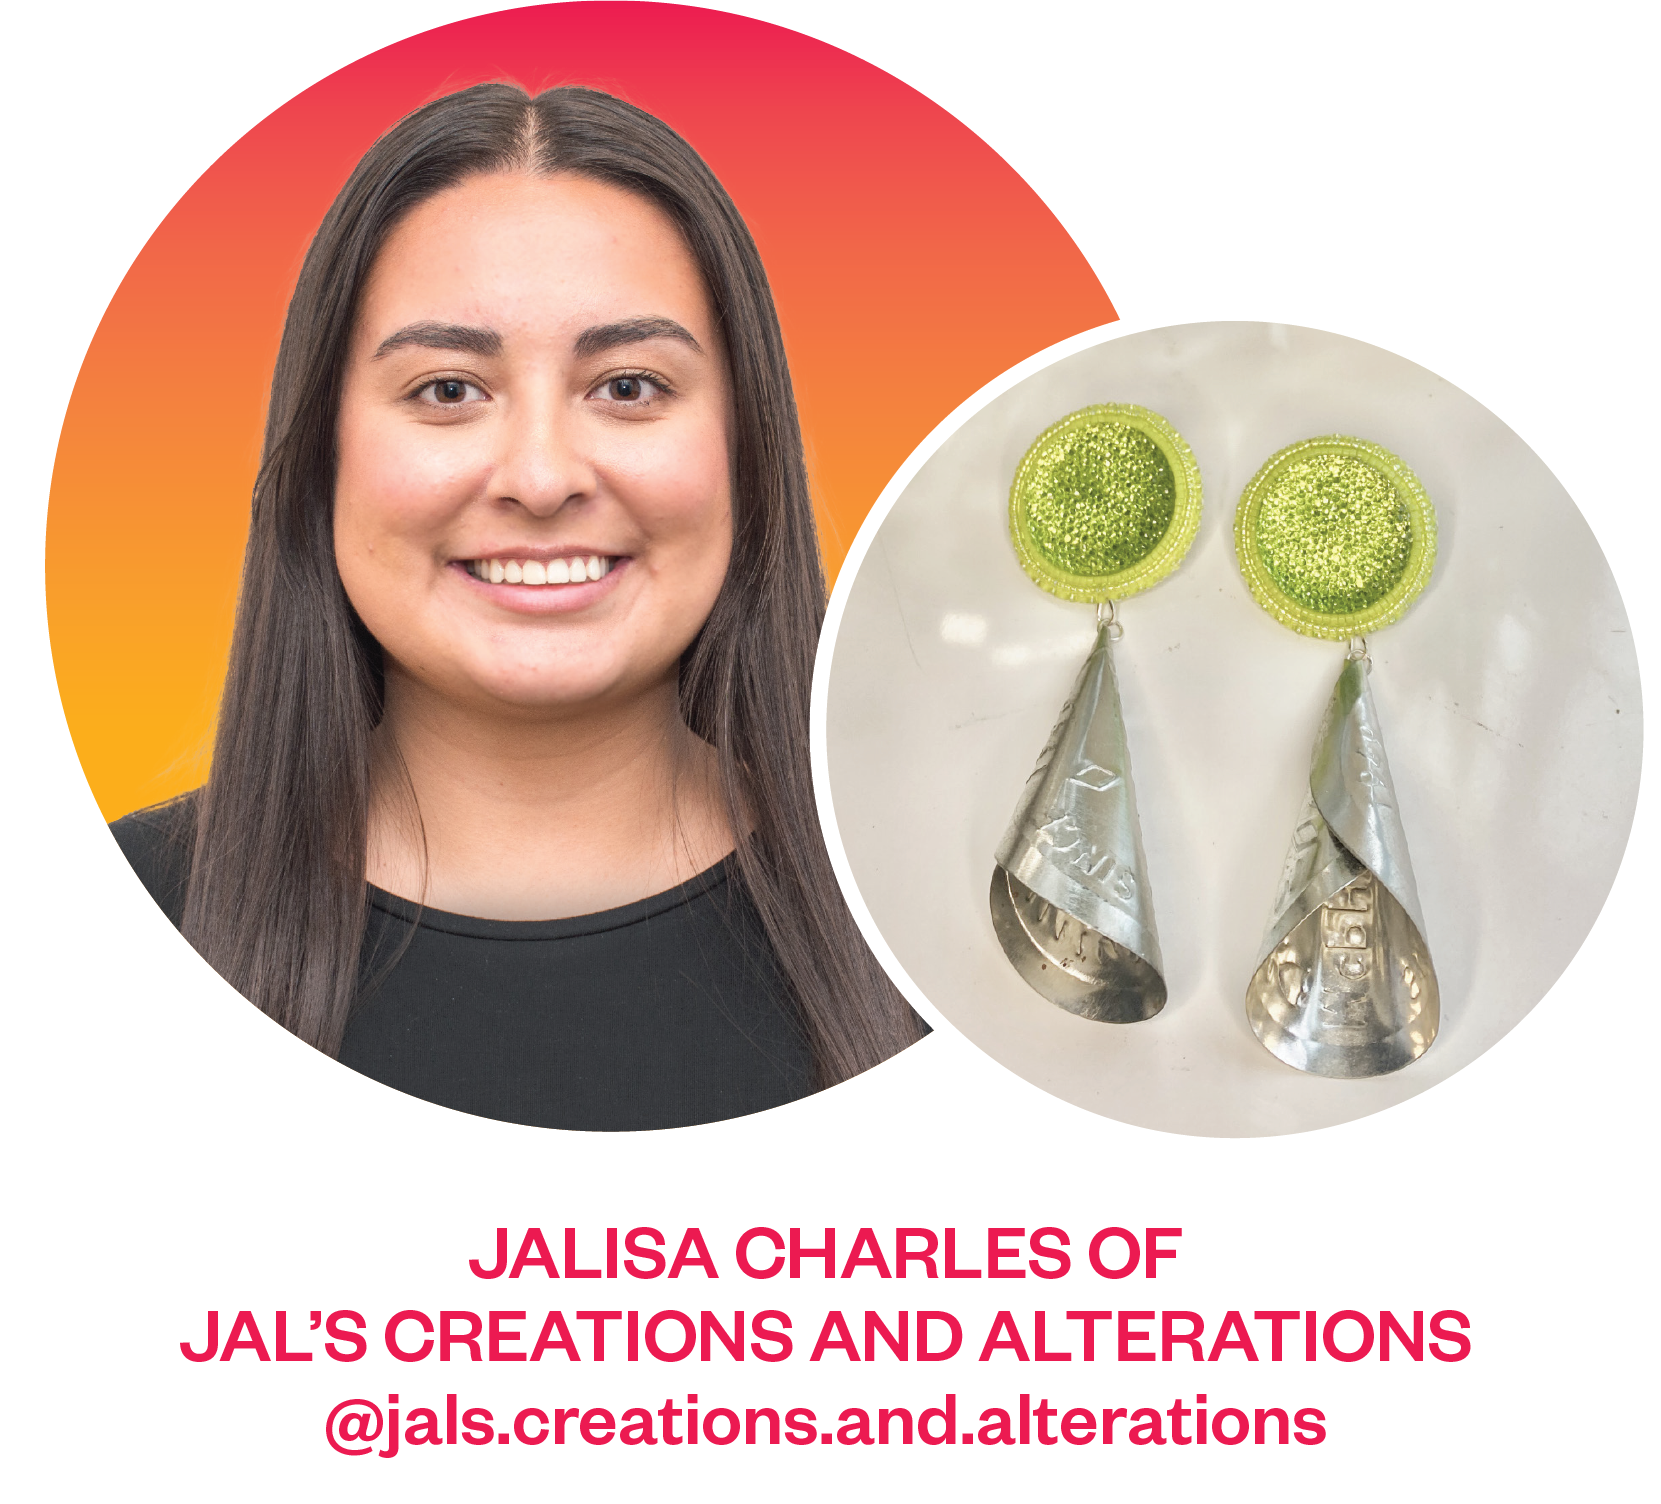 Circular image of Jalisa smiling with pink and orange background overlapped by circular image of her silver jingle cone earrings